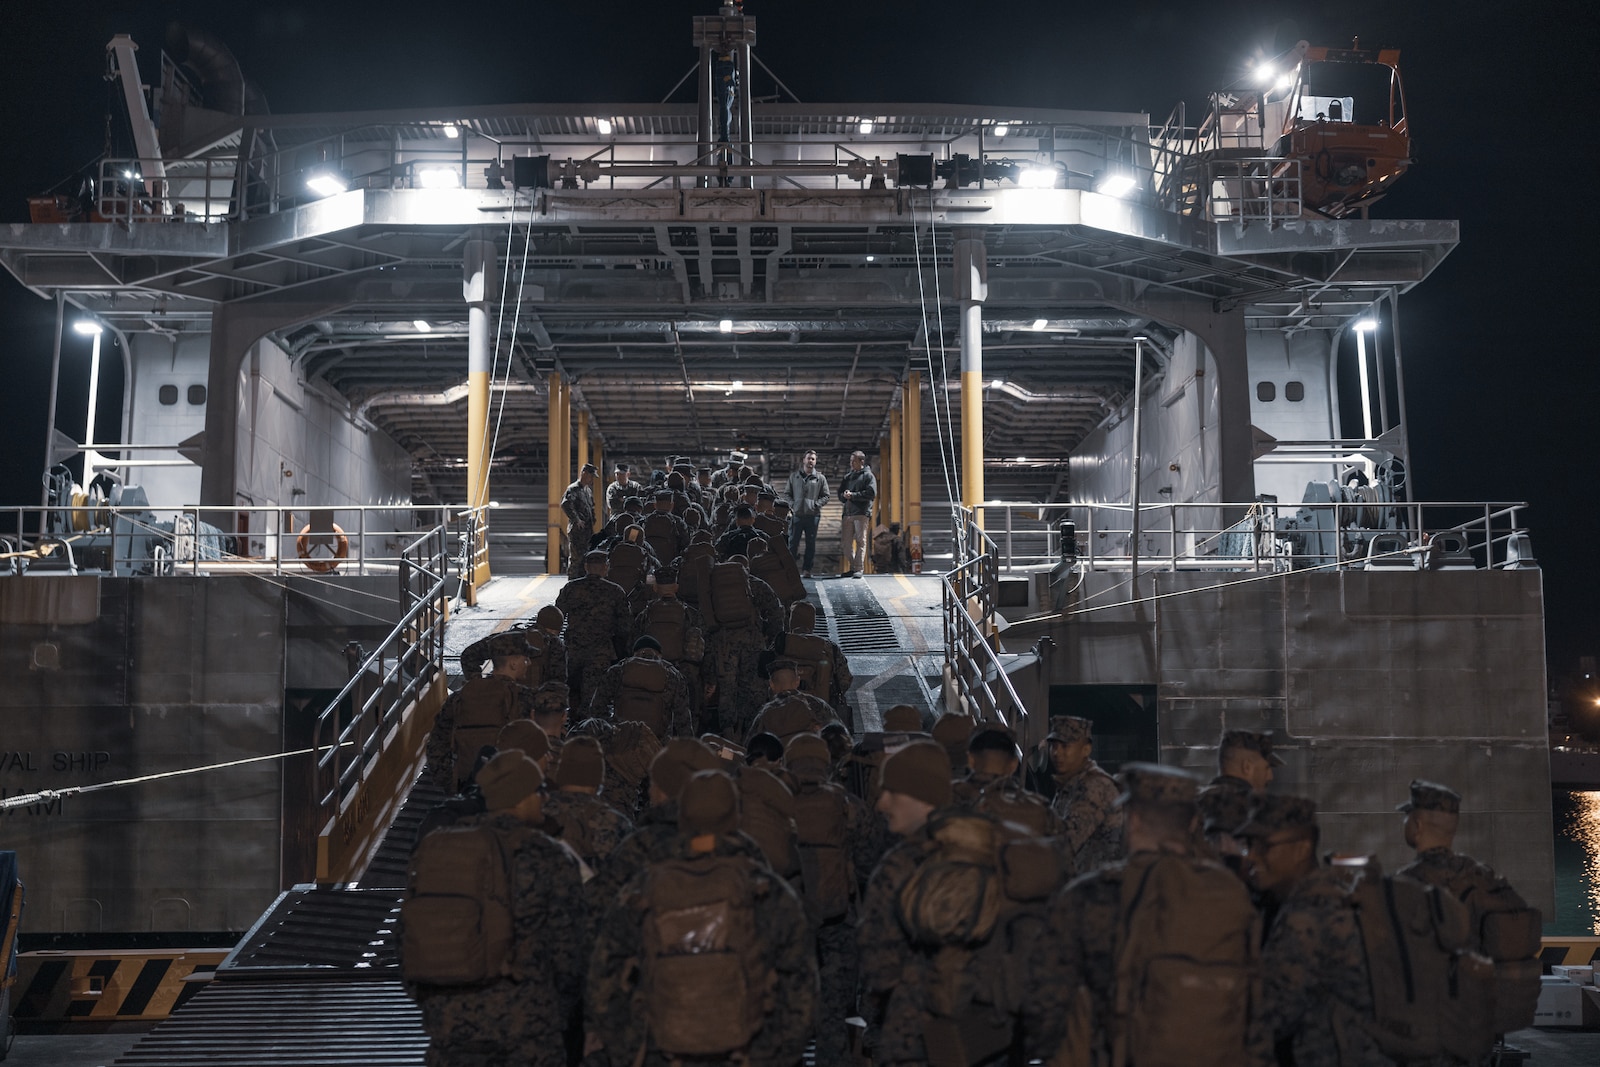 U.S. Marines with III Marine Expeditionary Force embark the high-speed transport vessel USNS Guam (T-HST 1) at Naha Military Port, Okinawa, Japan, March 3, 2023. The USNS Guam will transport Marines to the Republic of Korea for exercise Freedom Shield 23. Freedom Shield is a defense-oriented exercise designed to strengthen the ROK-U.S. Alliance, enhance our combined defense posture, and strengthen security and stability on the Korean peninsula. (U.S. Marine Corps photo by Lance Cpl. Tyler Andrews)